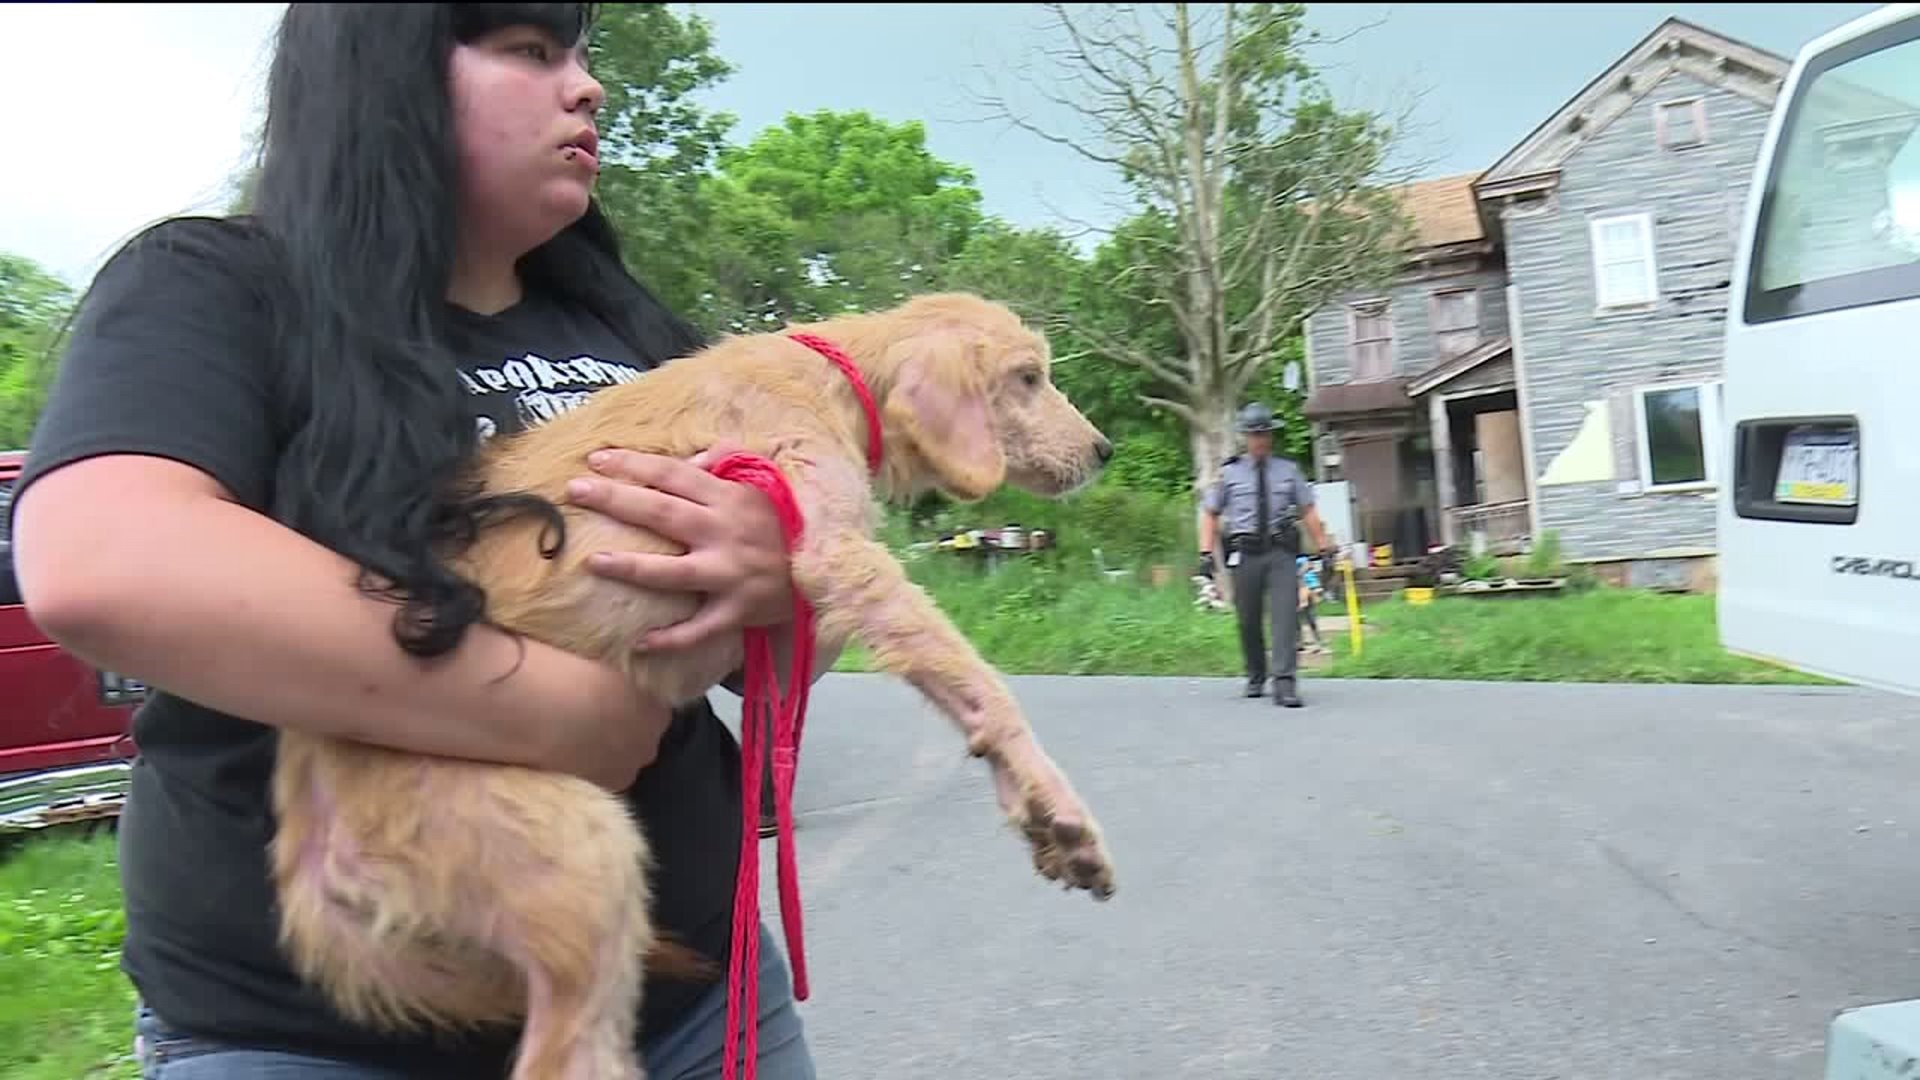 Dozens of Pets Rescued from Filthy Home in Schuylkill County